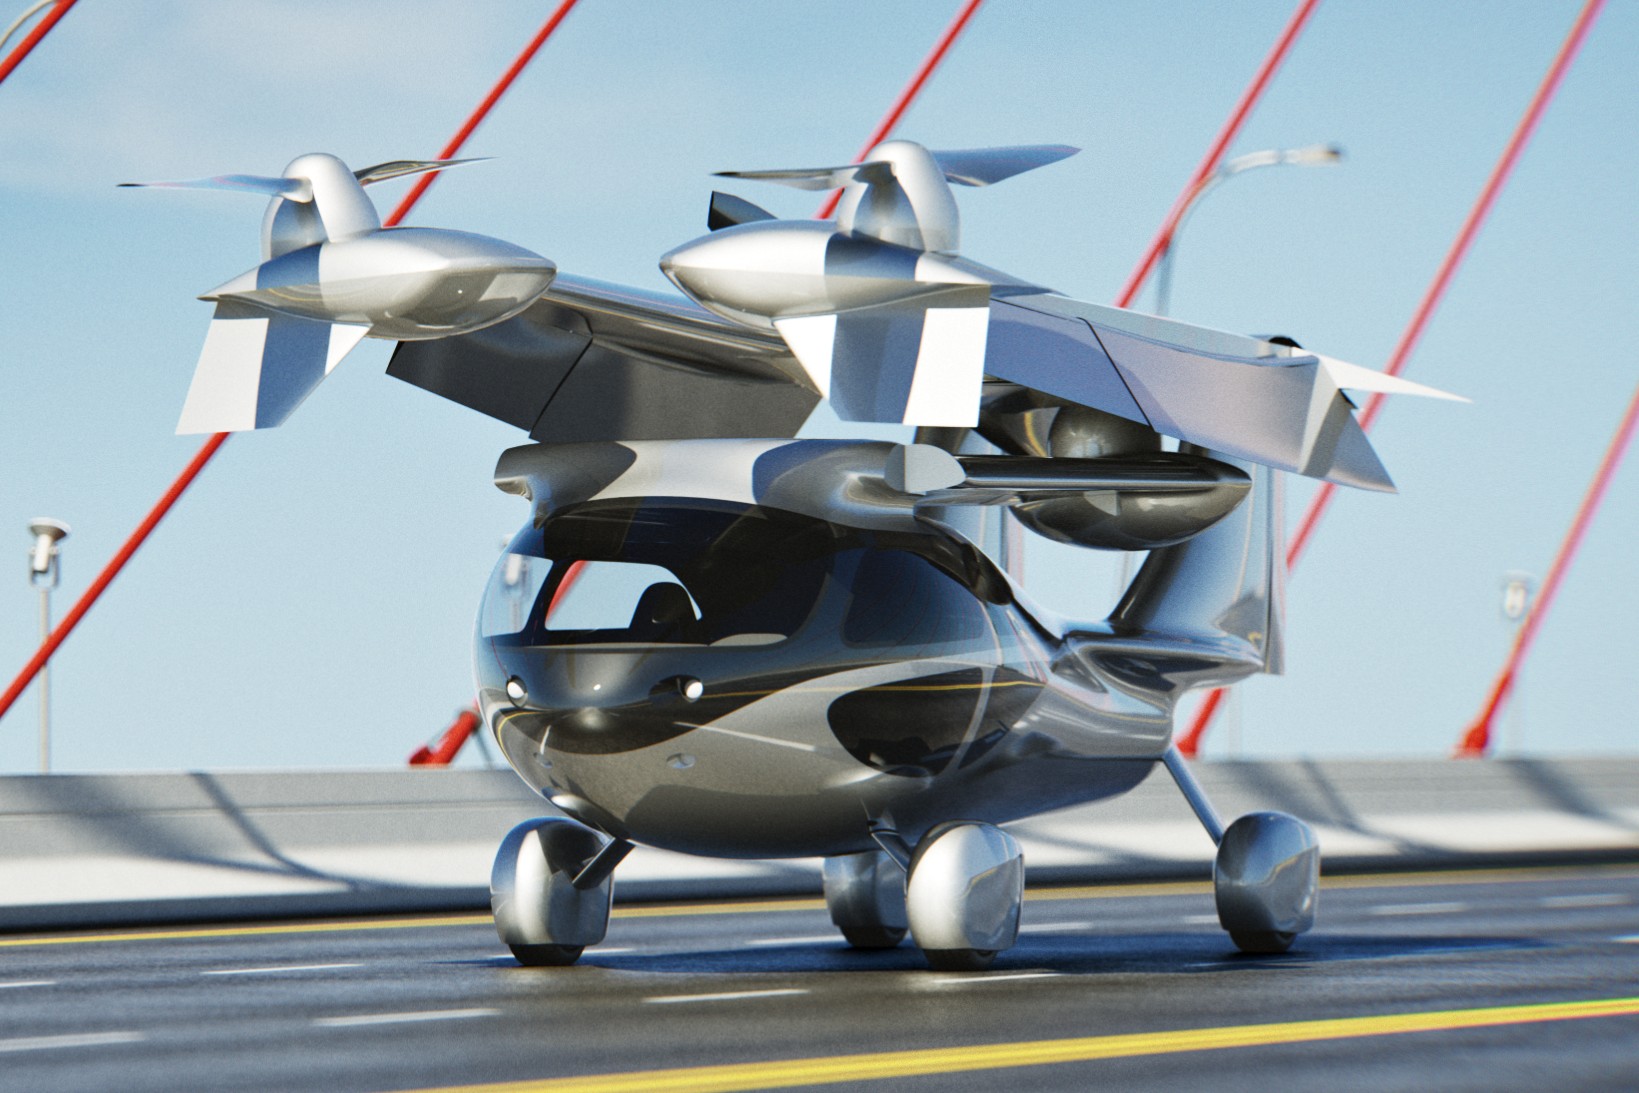 The Aska A5 flying car drives across a bridge with its rotor arms folded up for storage.